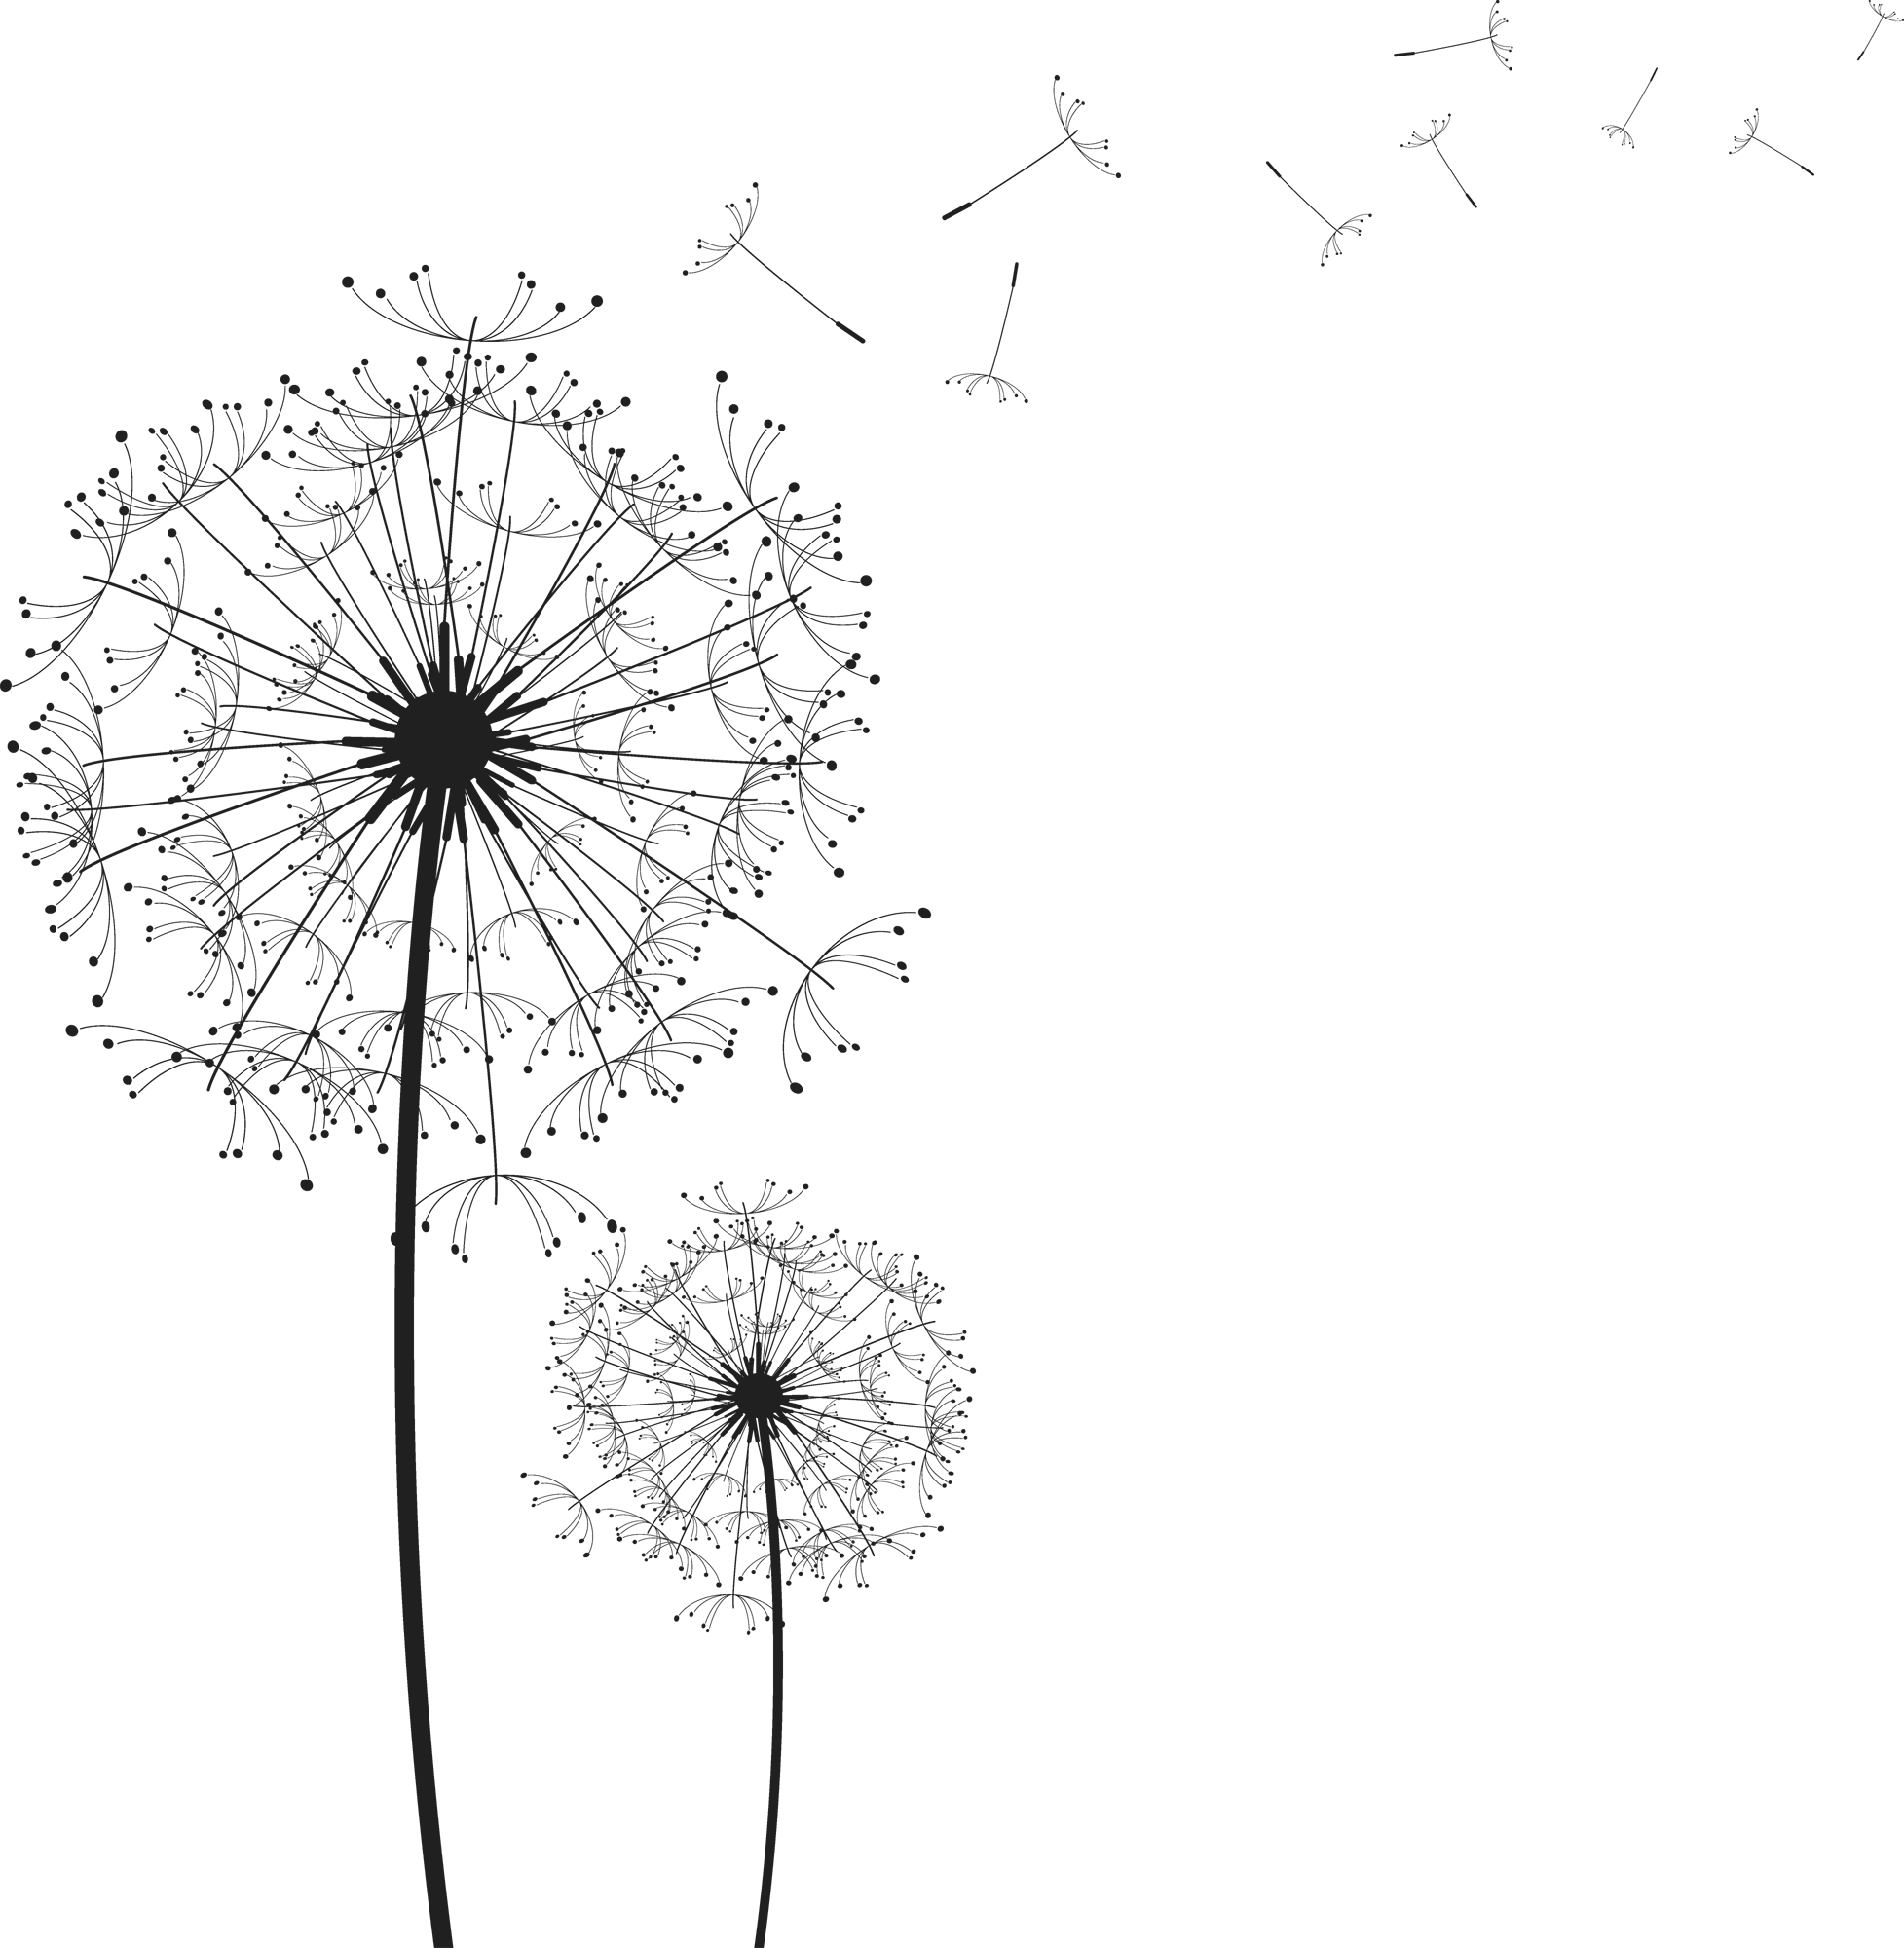 A Black Background With Dandelions